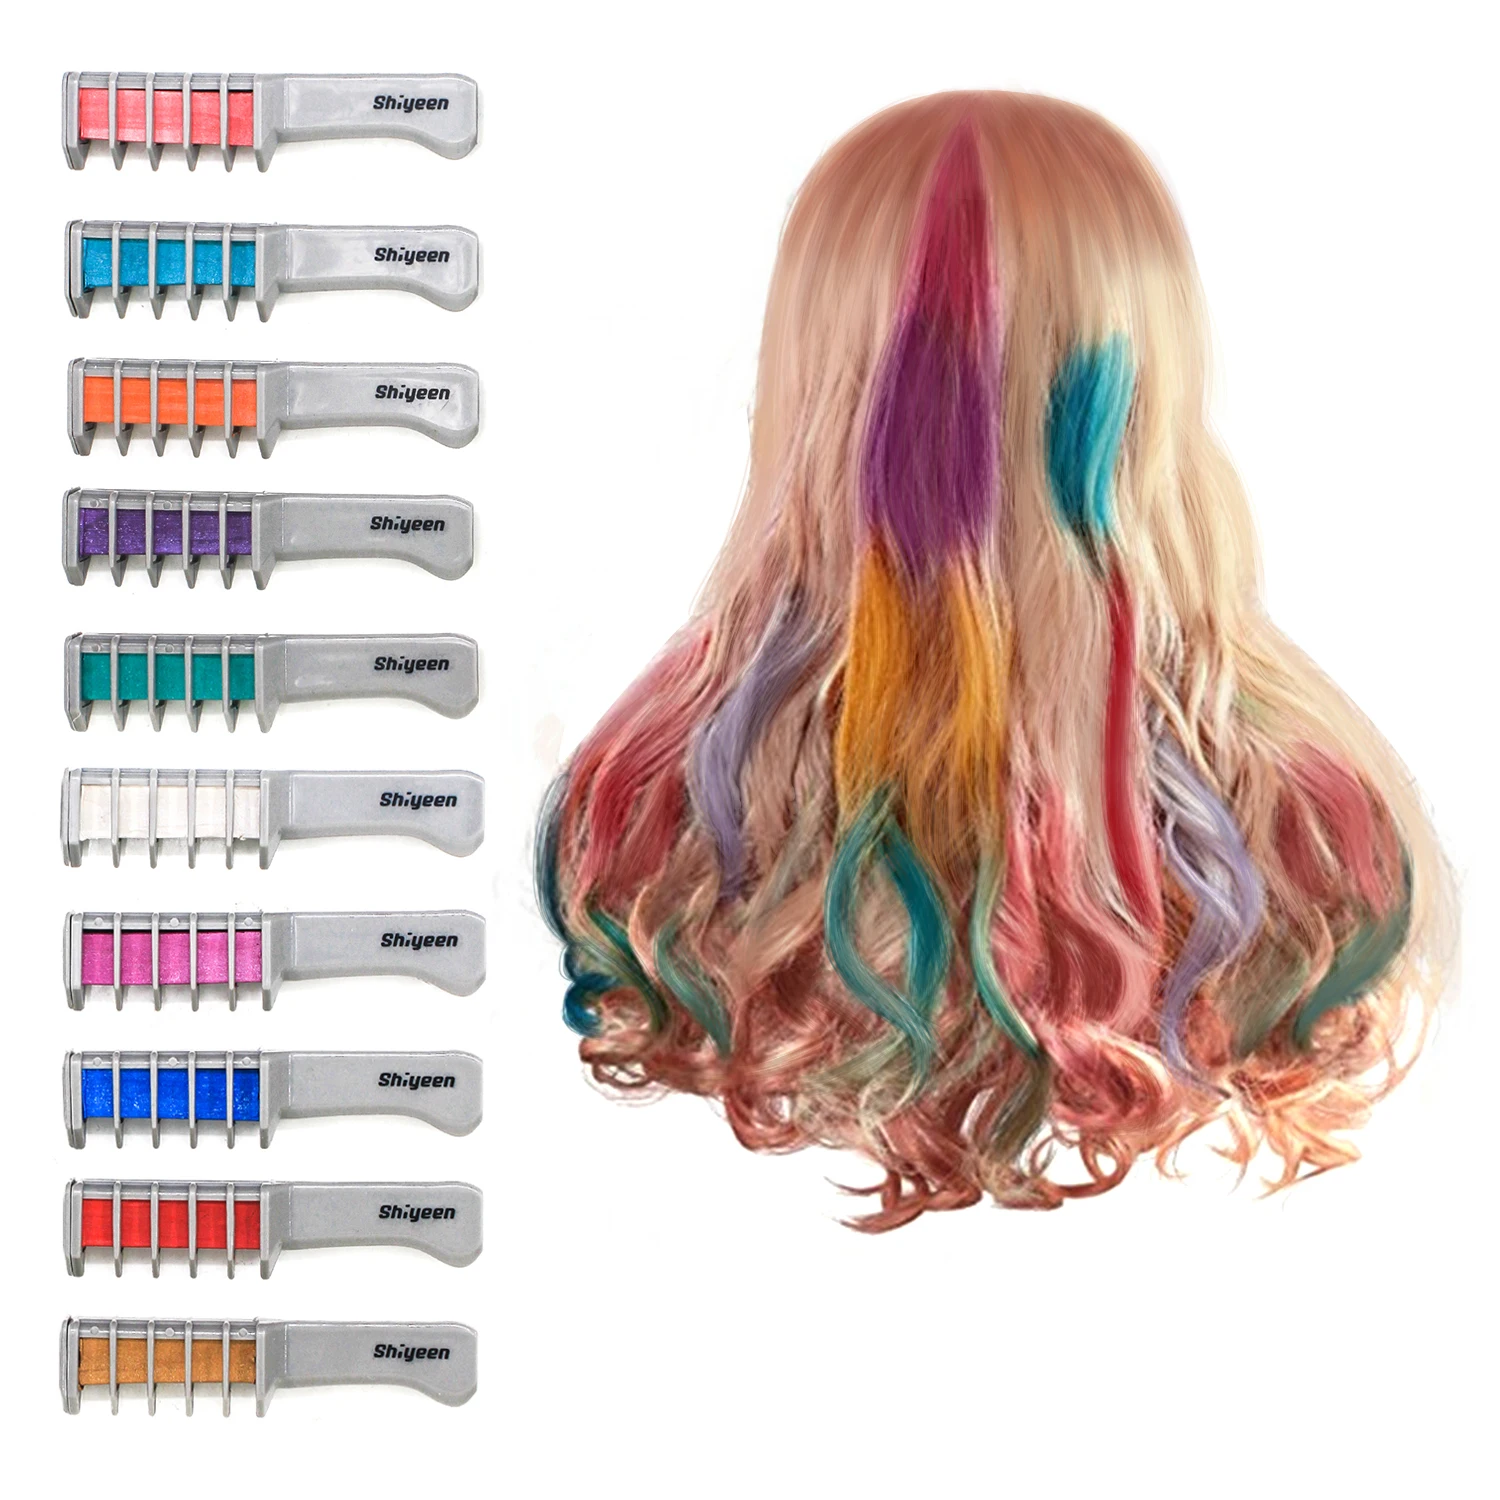 How to DYE kid's hair with HAIR CHALK. Quick and safe coloring for kids 